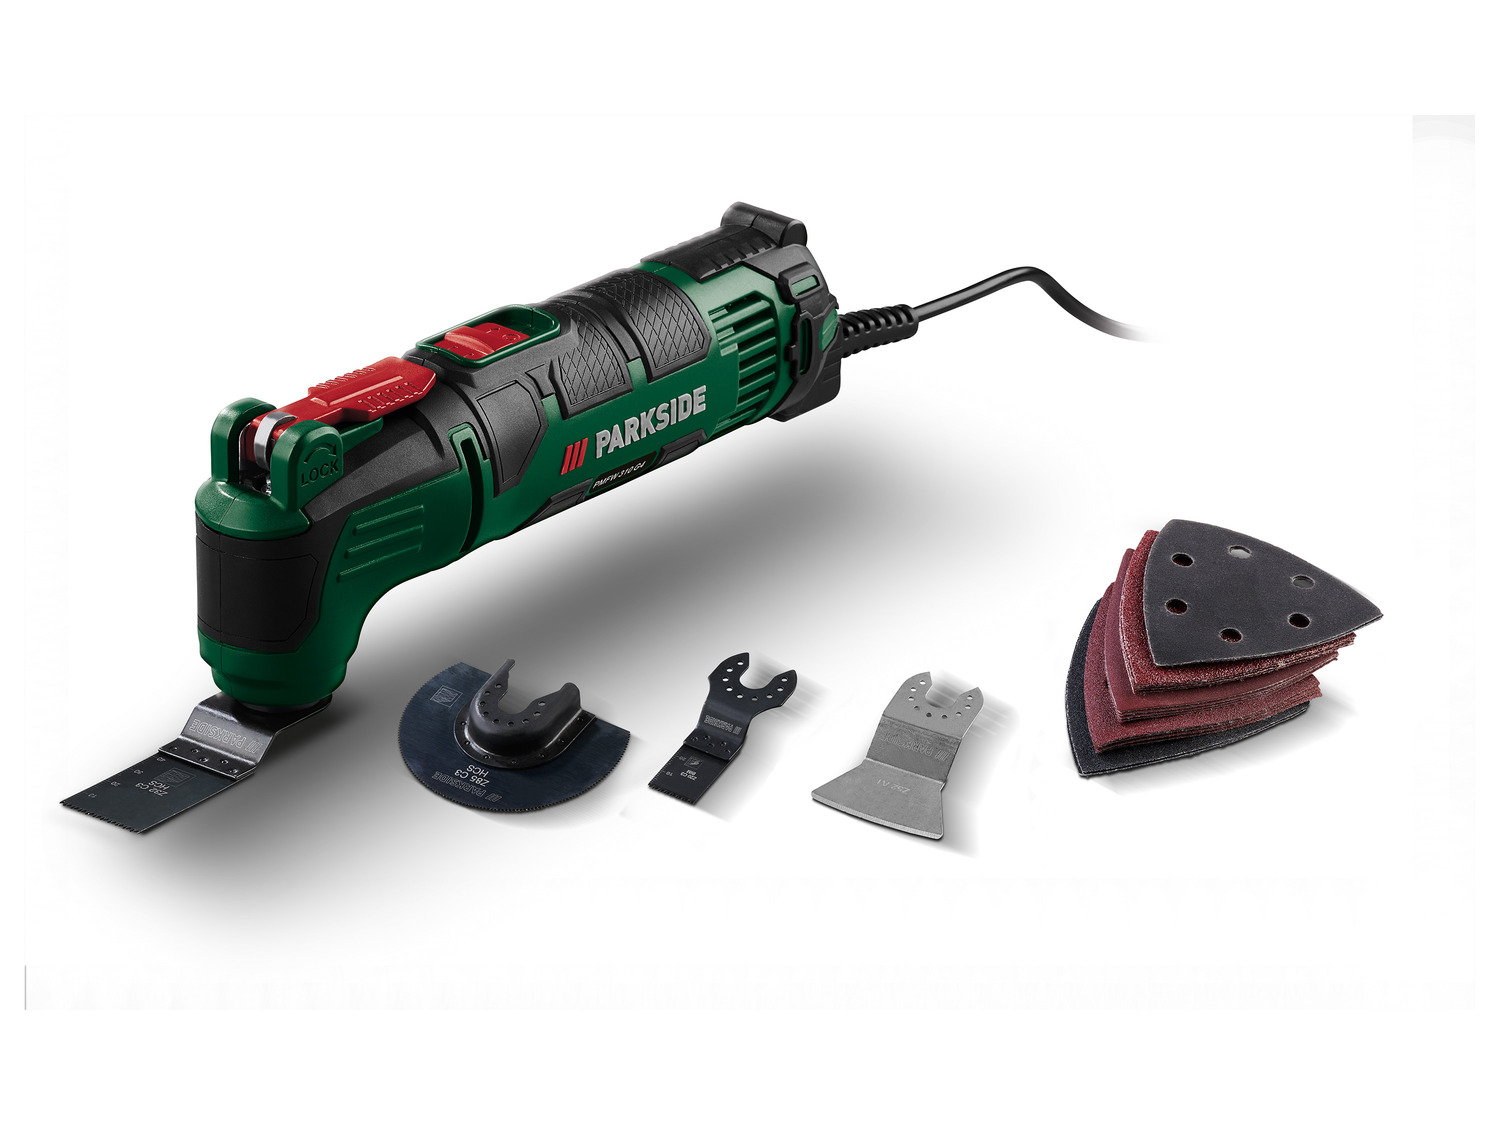 PARKSIDE® Outil multifonction PMFW 310 G4, 310 W